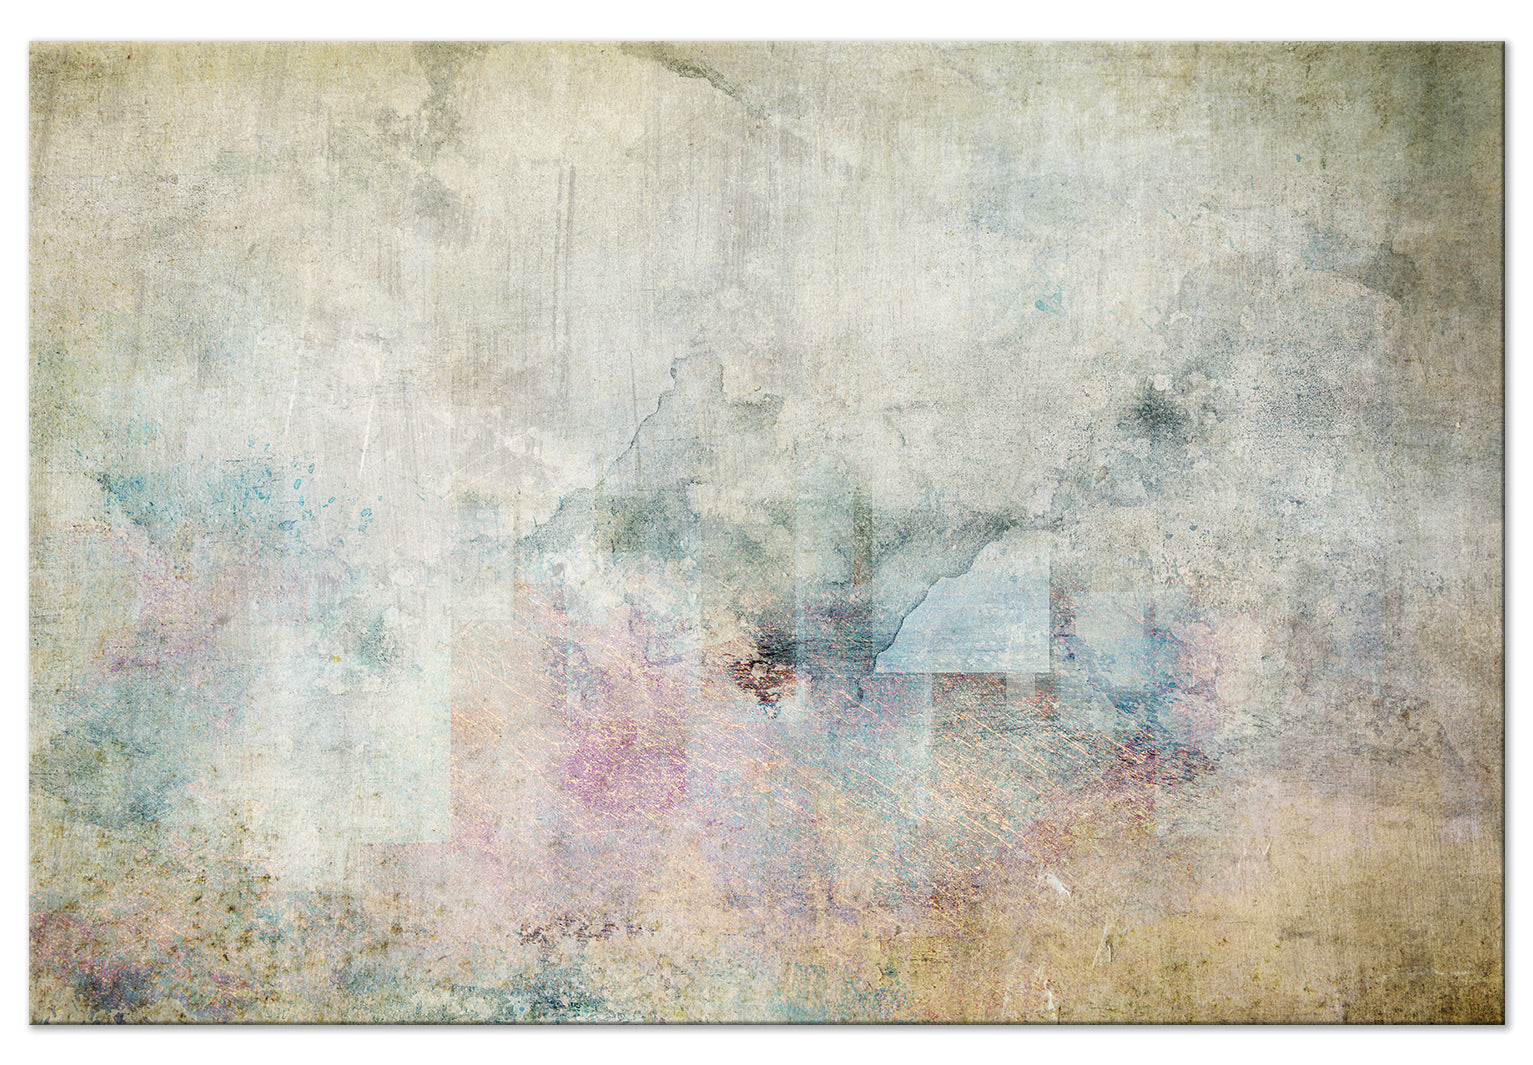 Abstract Canvas Wall Art - Mystical Apparition